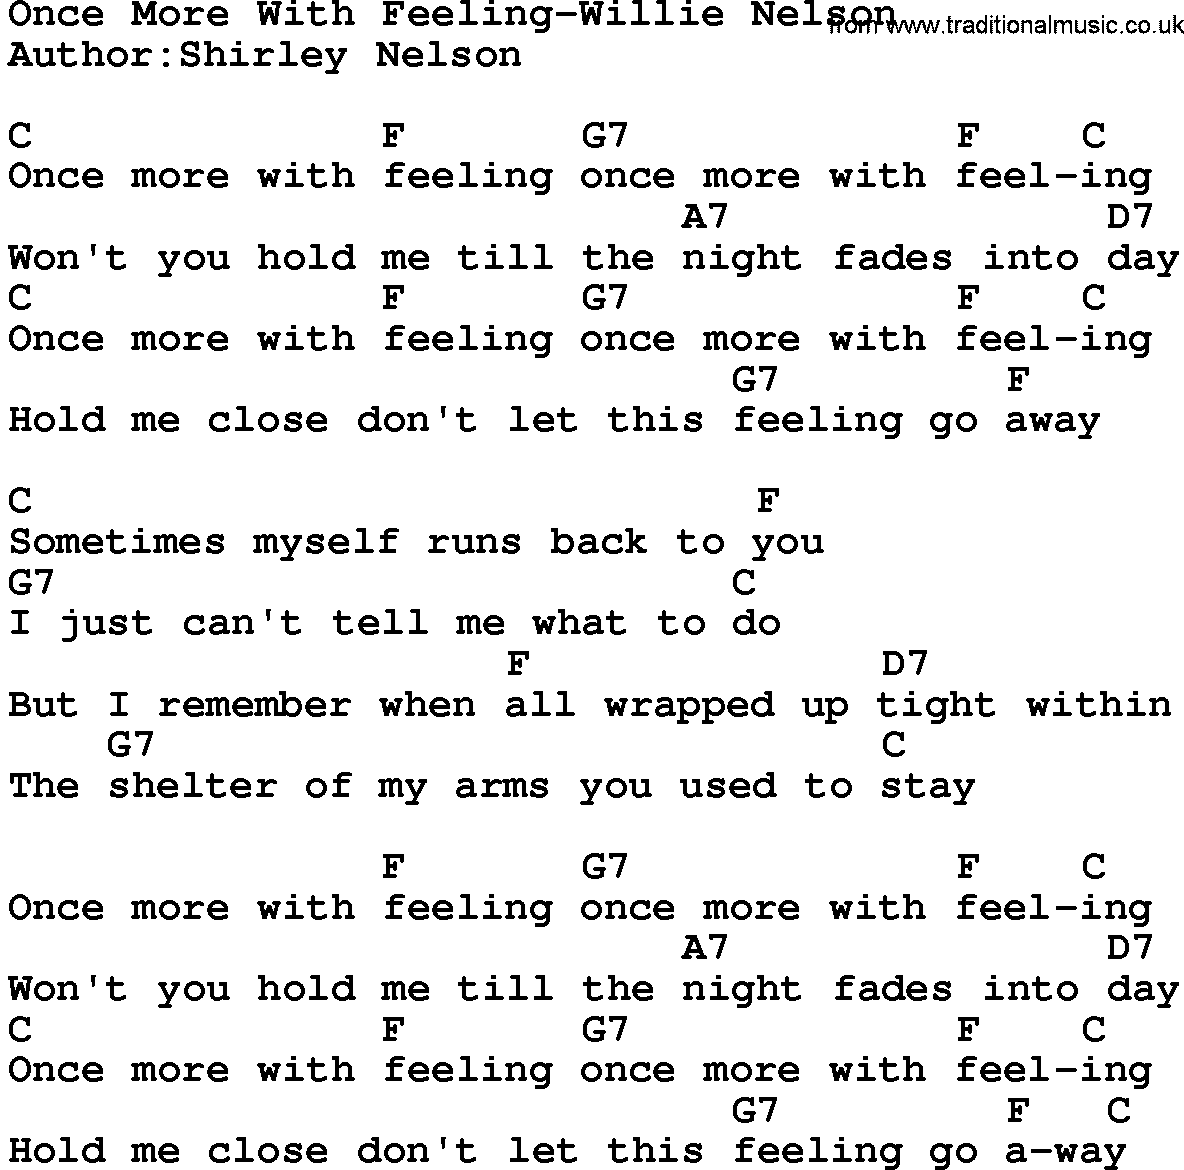 Country music song: Once More With Feeling-Willie Nelson lyrics and chords